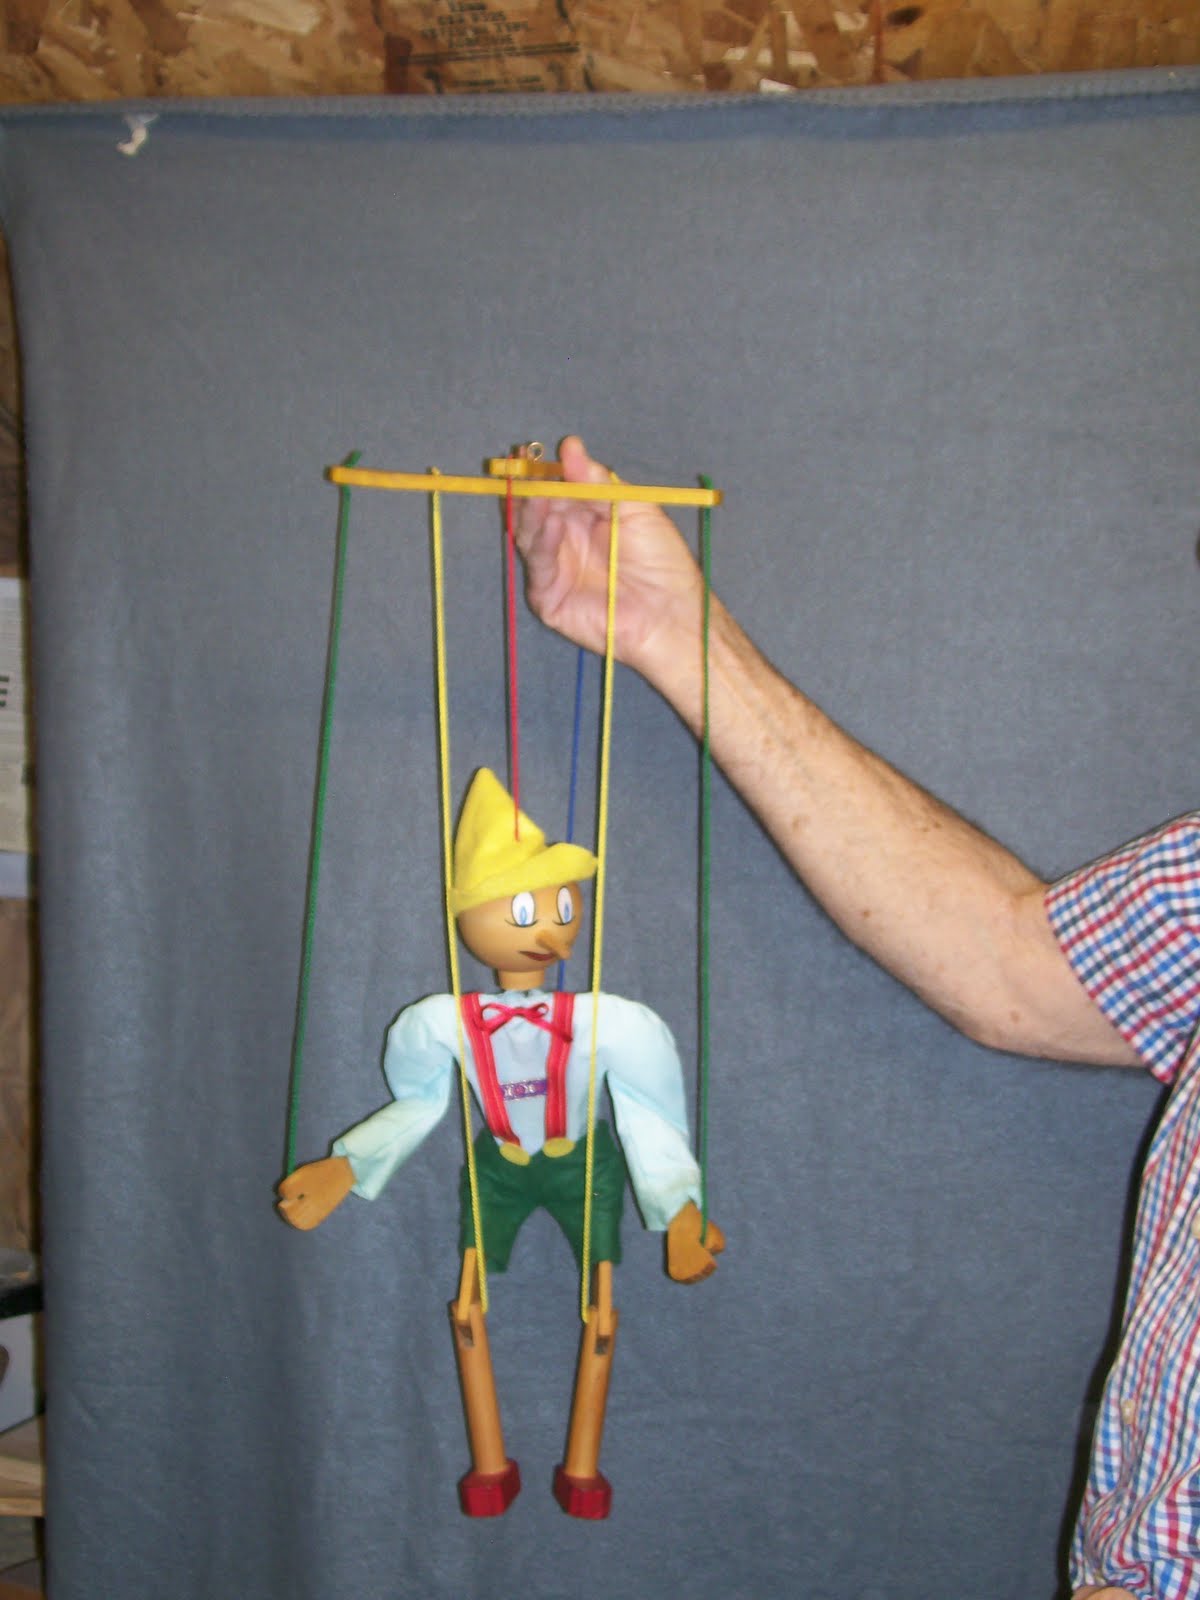 Mr. D's Daily Ventriloquist Journal: Pulling Strings ...